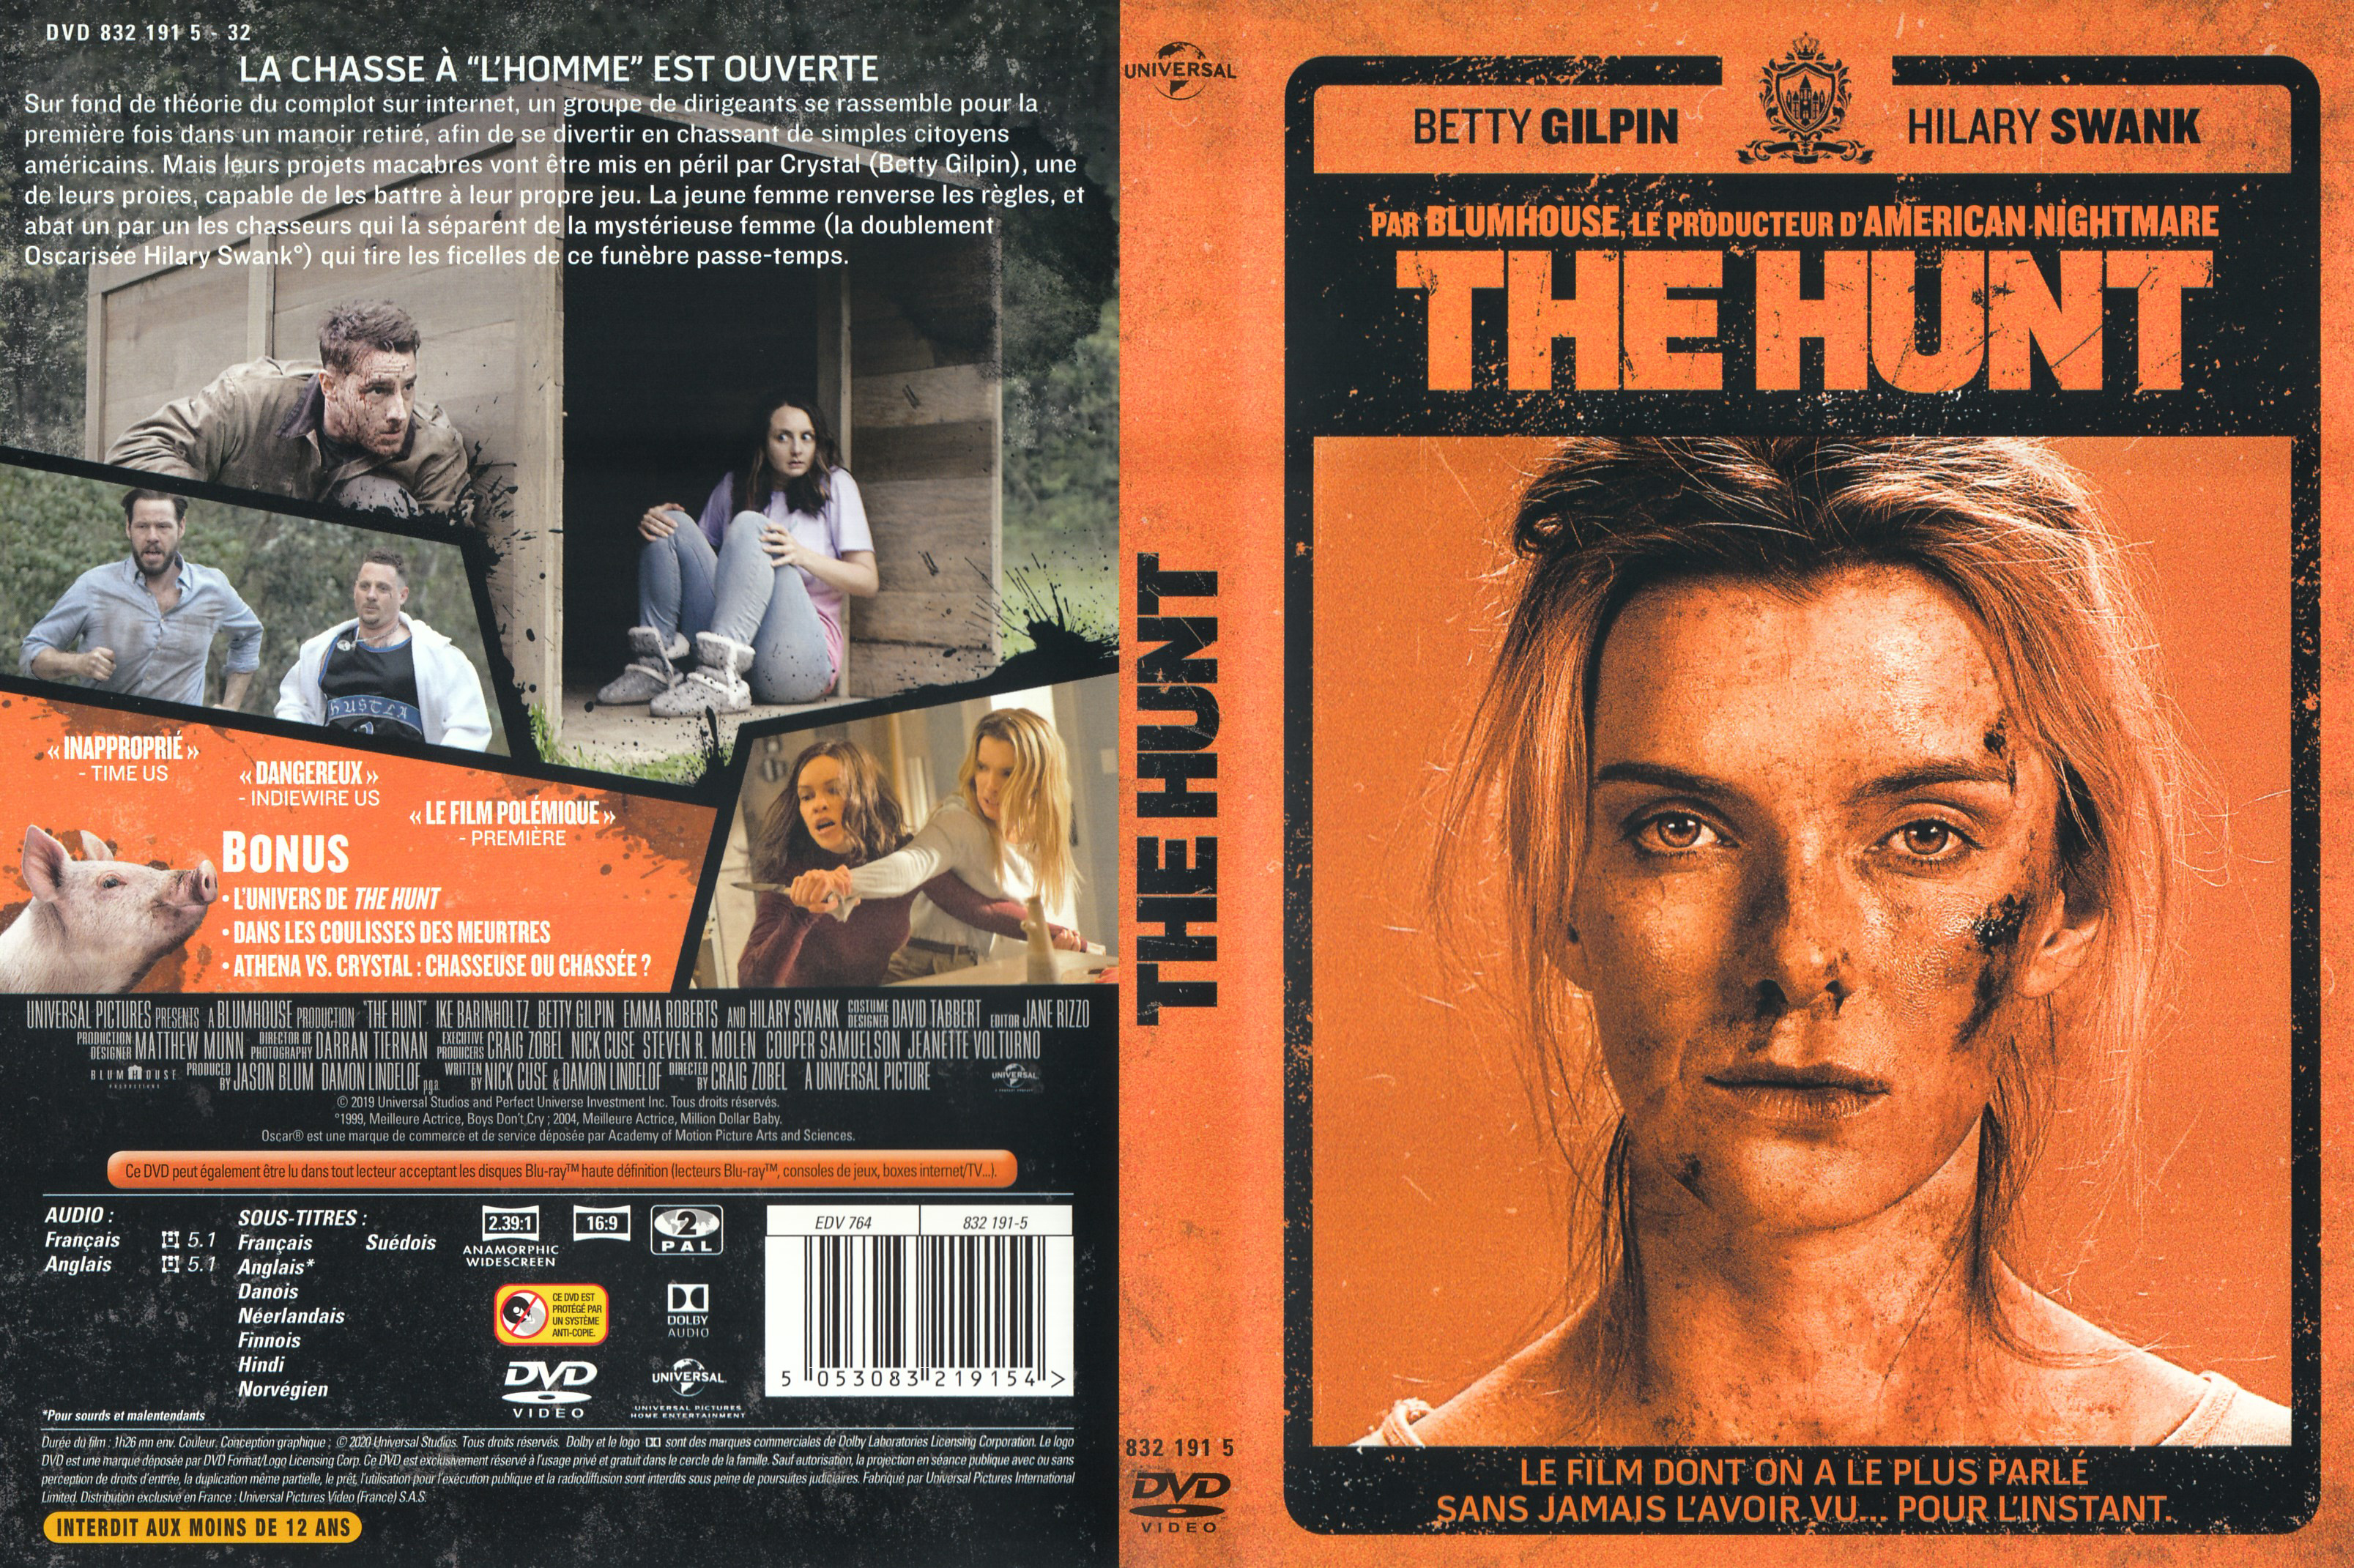 Jaquette DVD The hunt